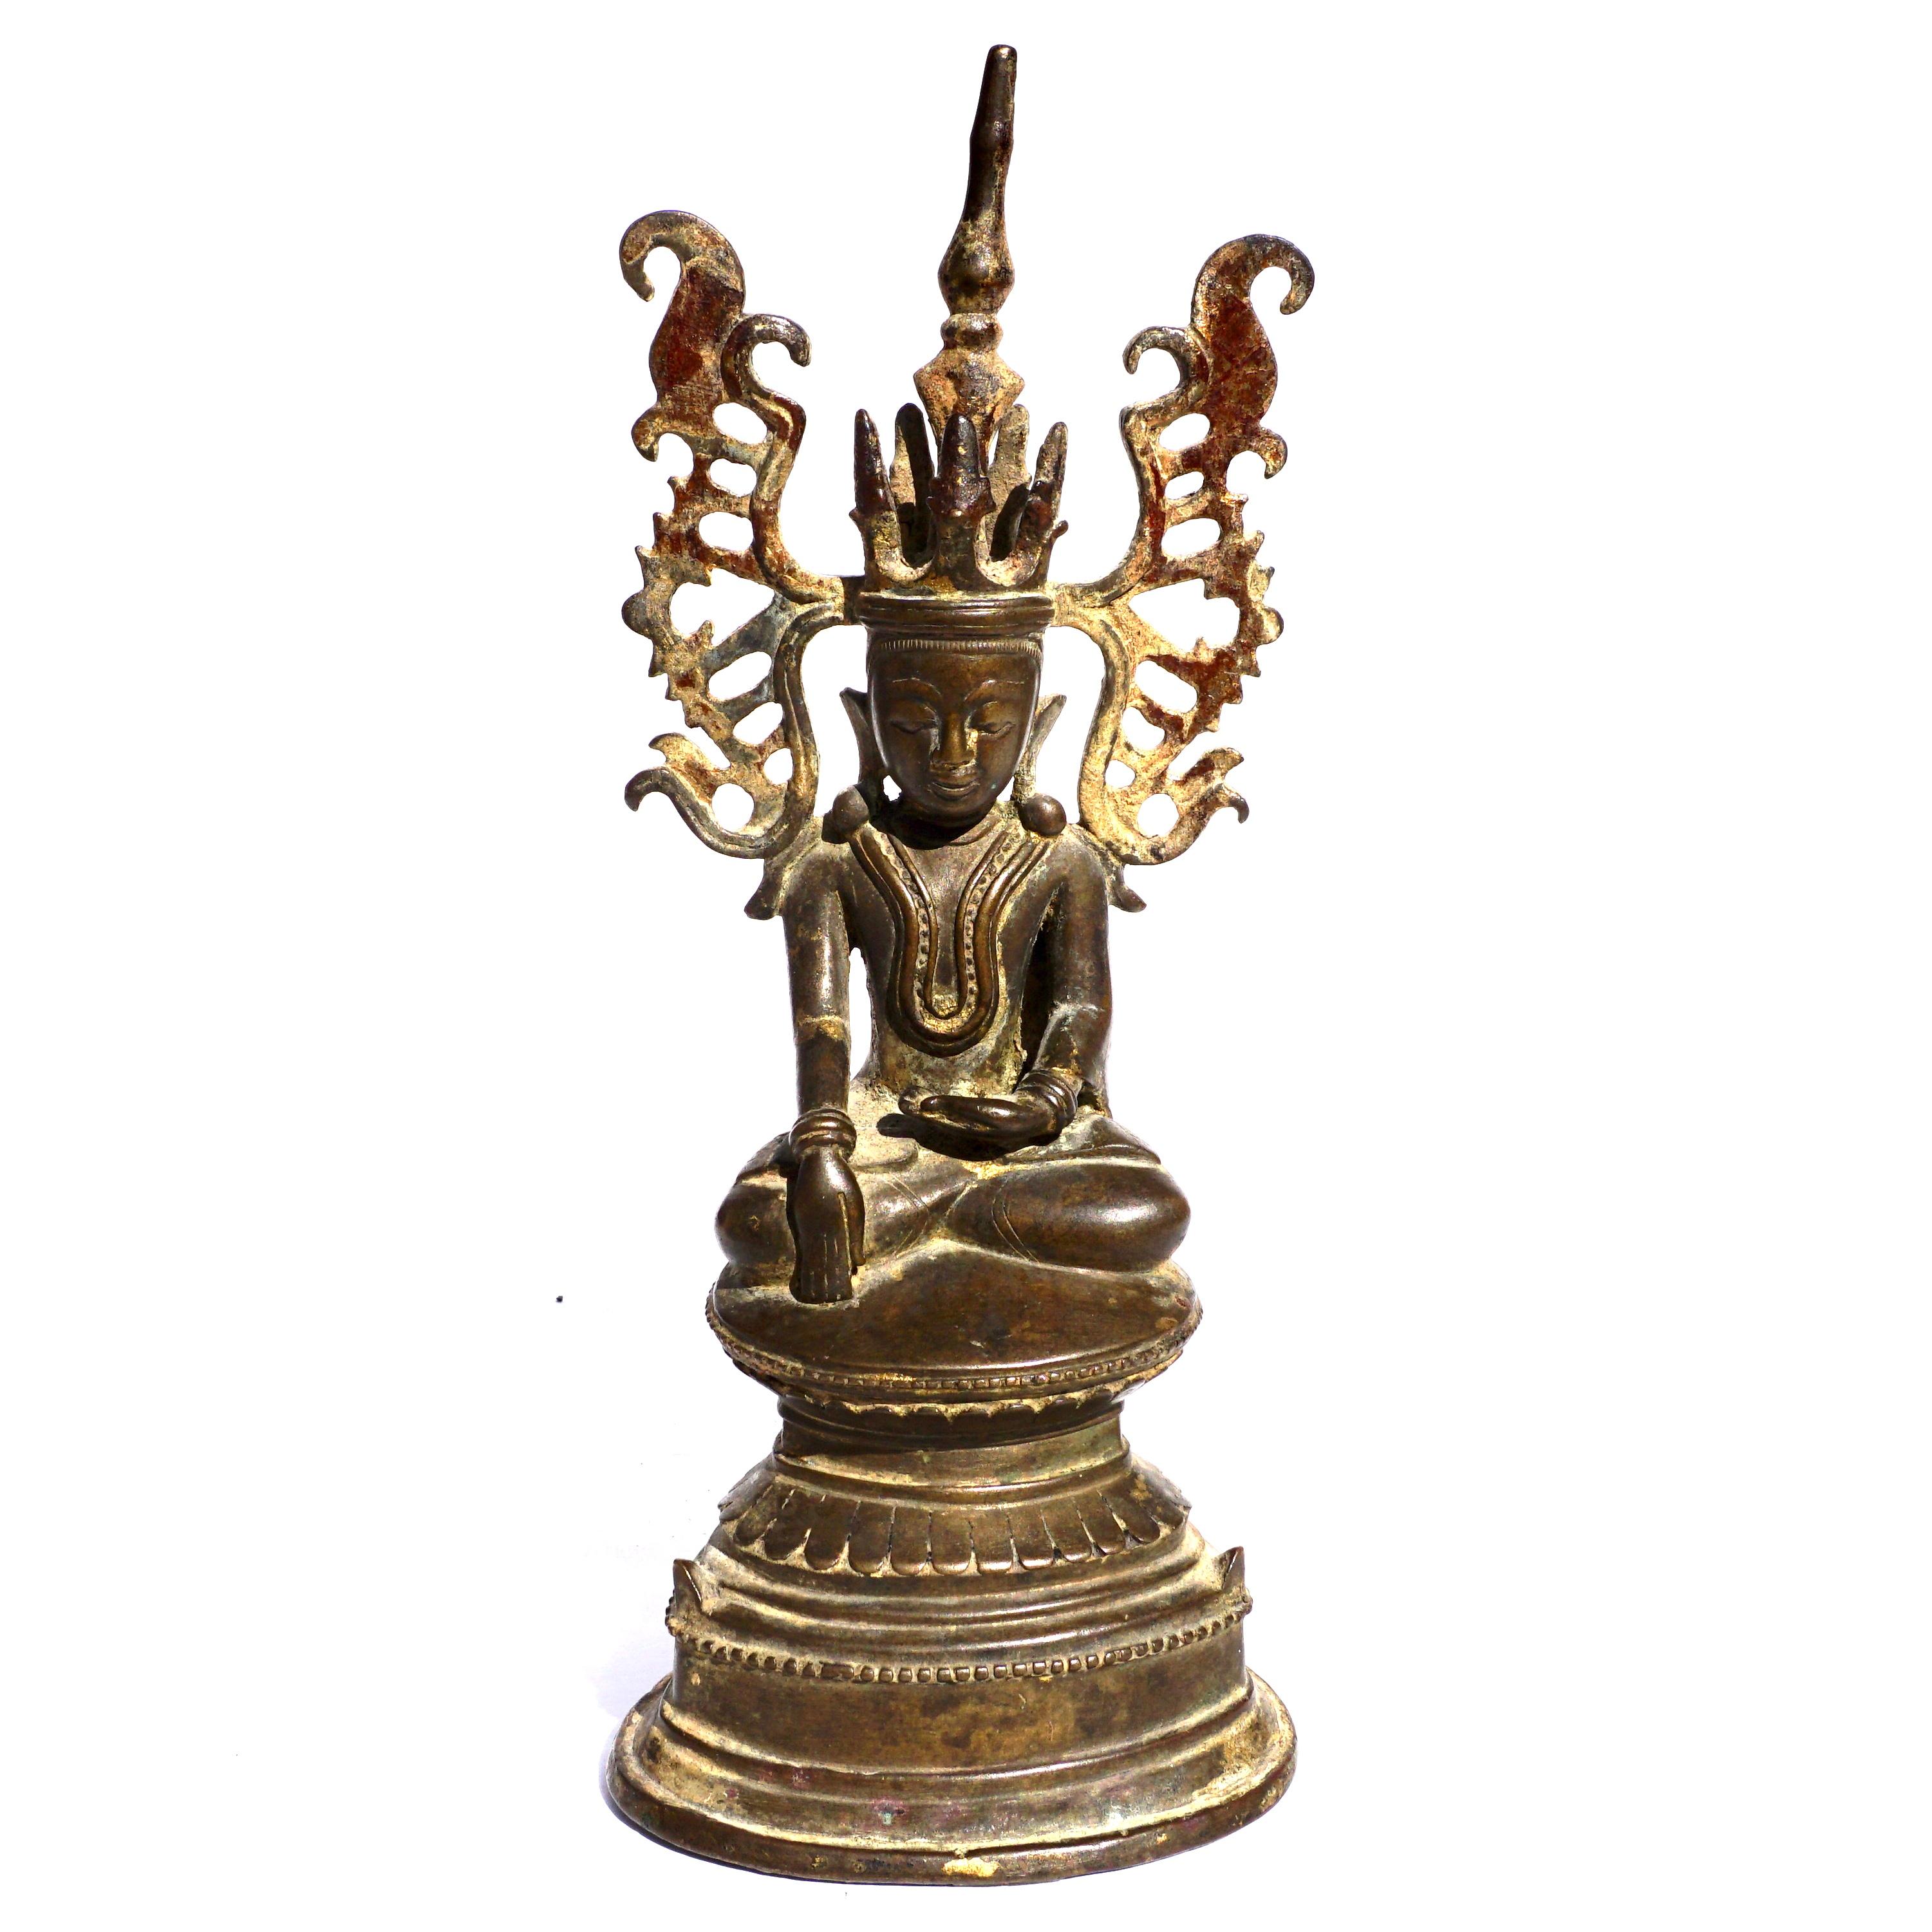 Possibly Khmir period but probably just after. Bronze buddha seated in bhumisparsha mudra on stepped base, remnants of earlier gilding throughout, I have been dealing in ancient bronze Buddhas for over 20 years now and these Thai - Southeast asian